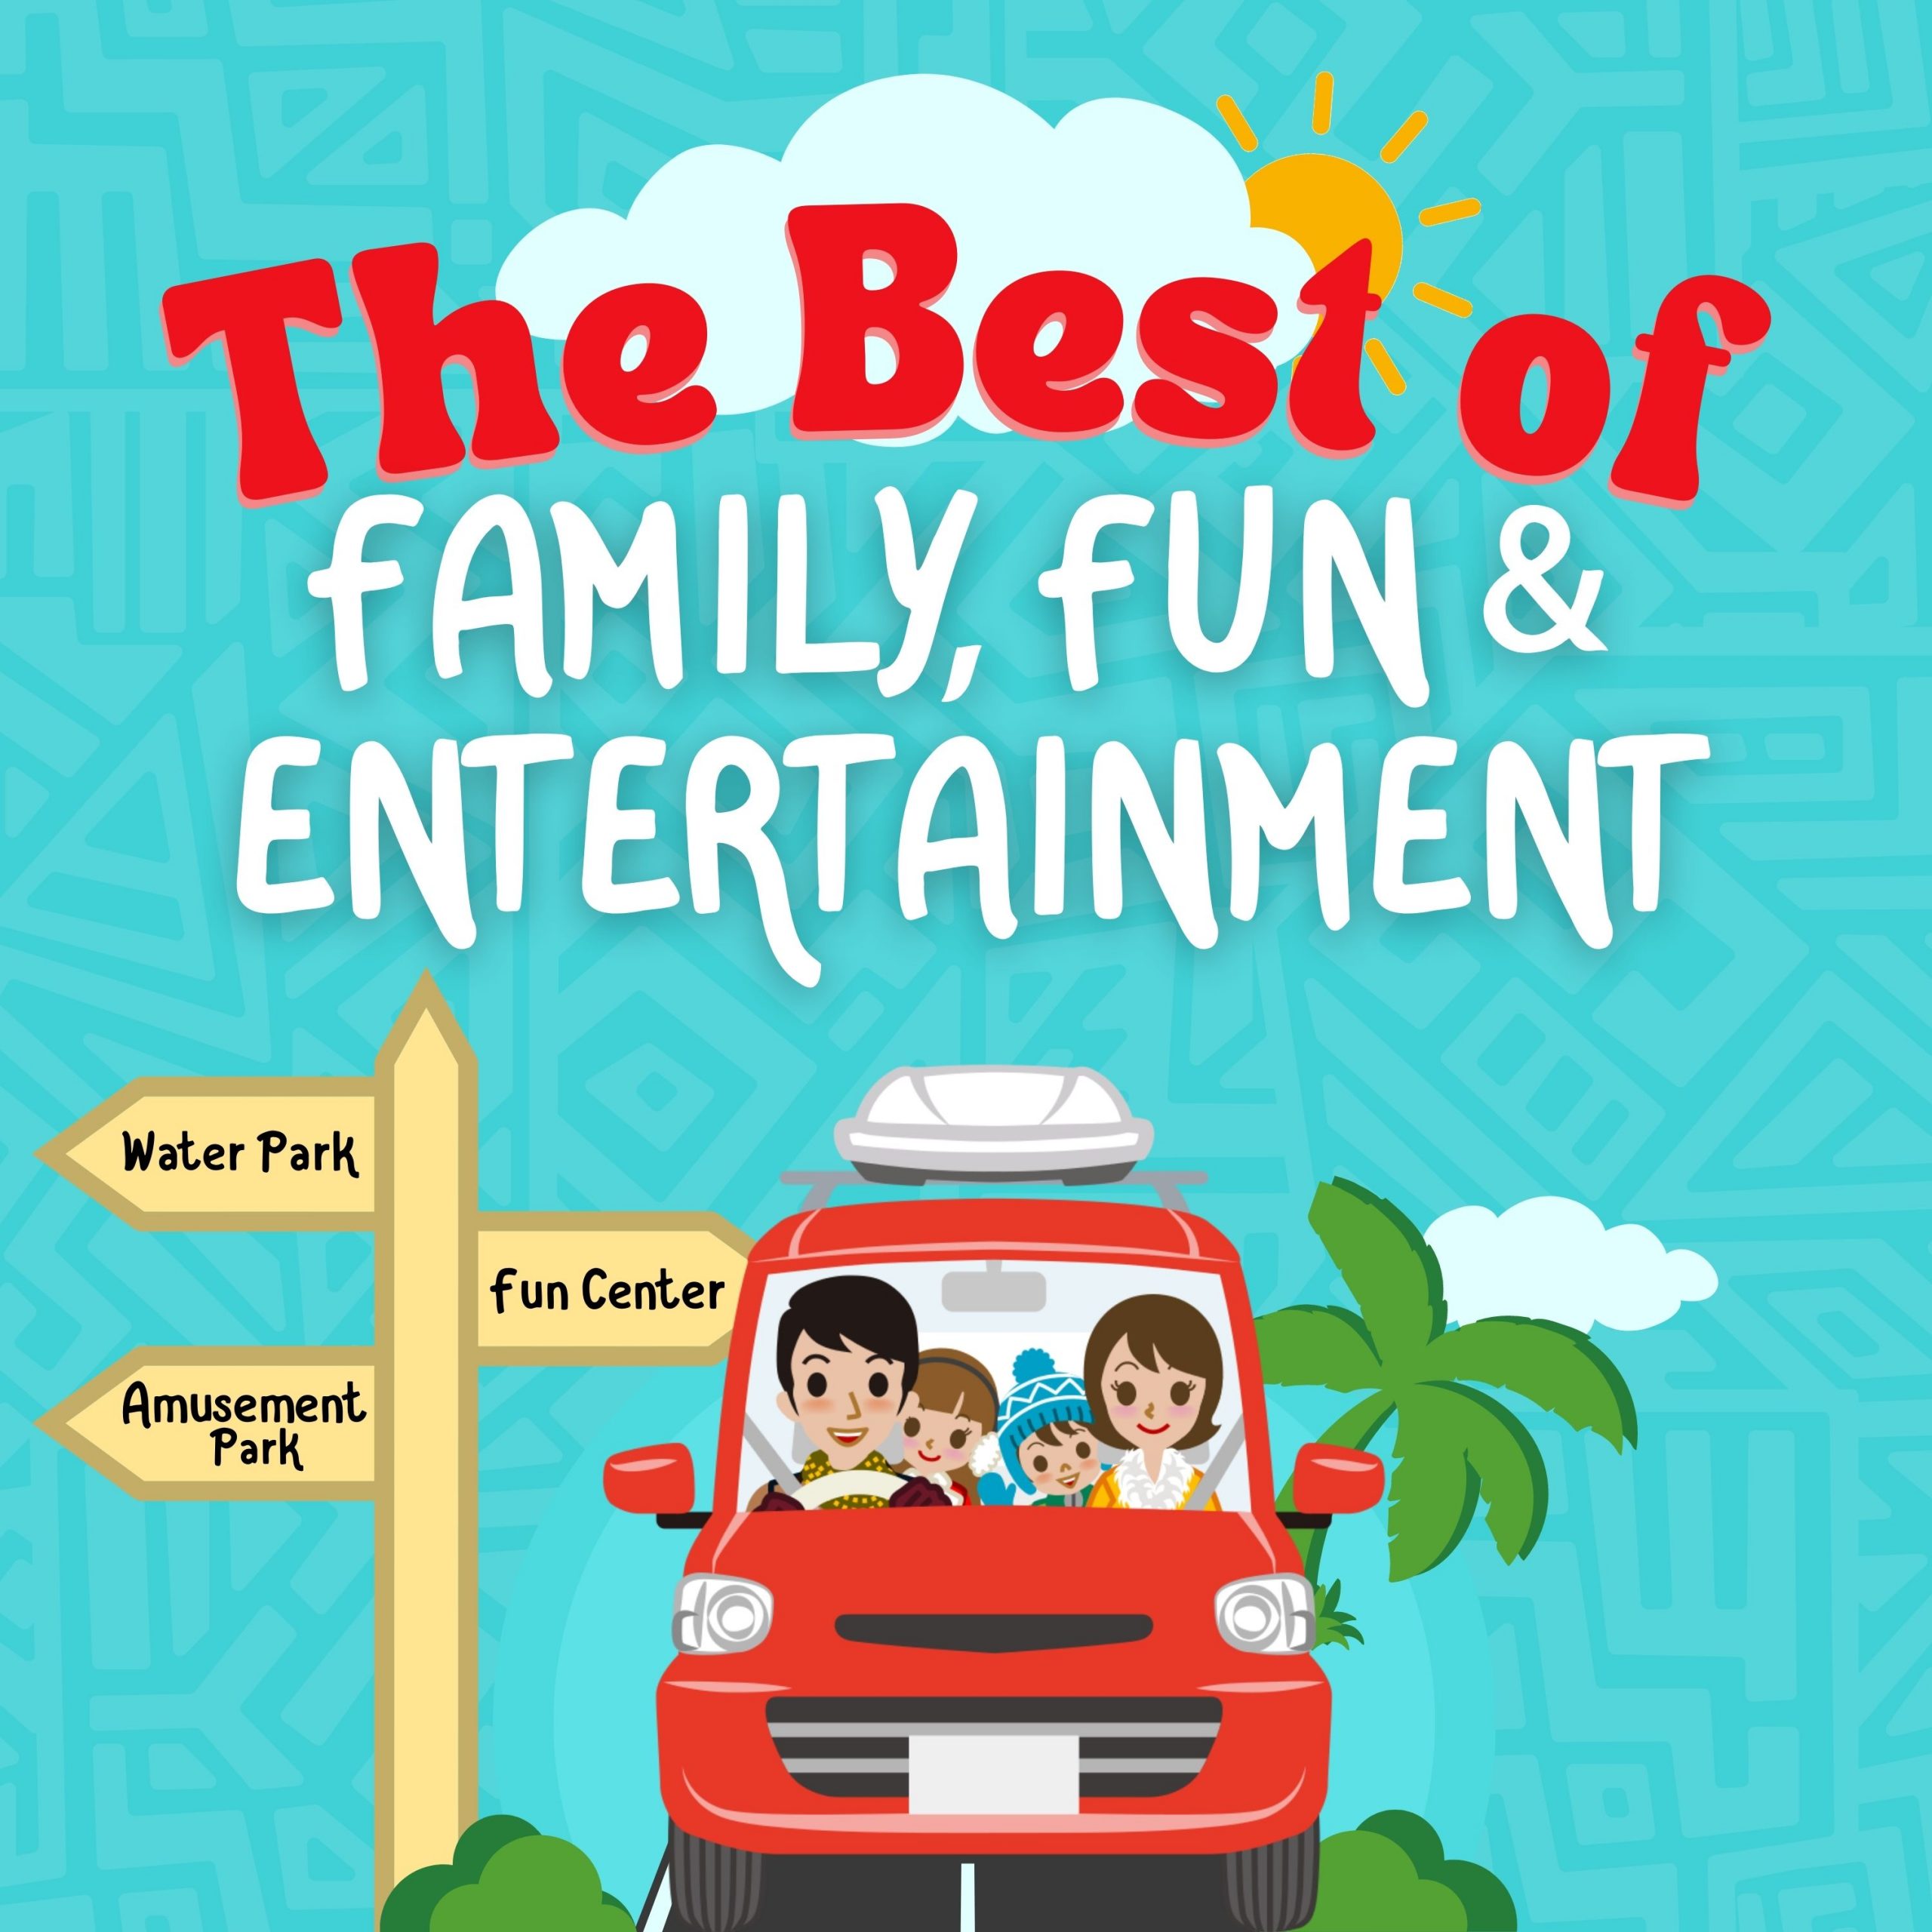 The Best of Family, Fun & Entertainment